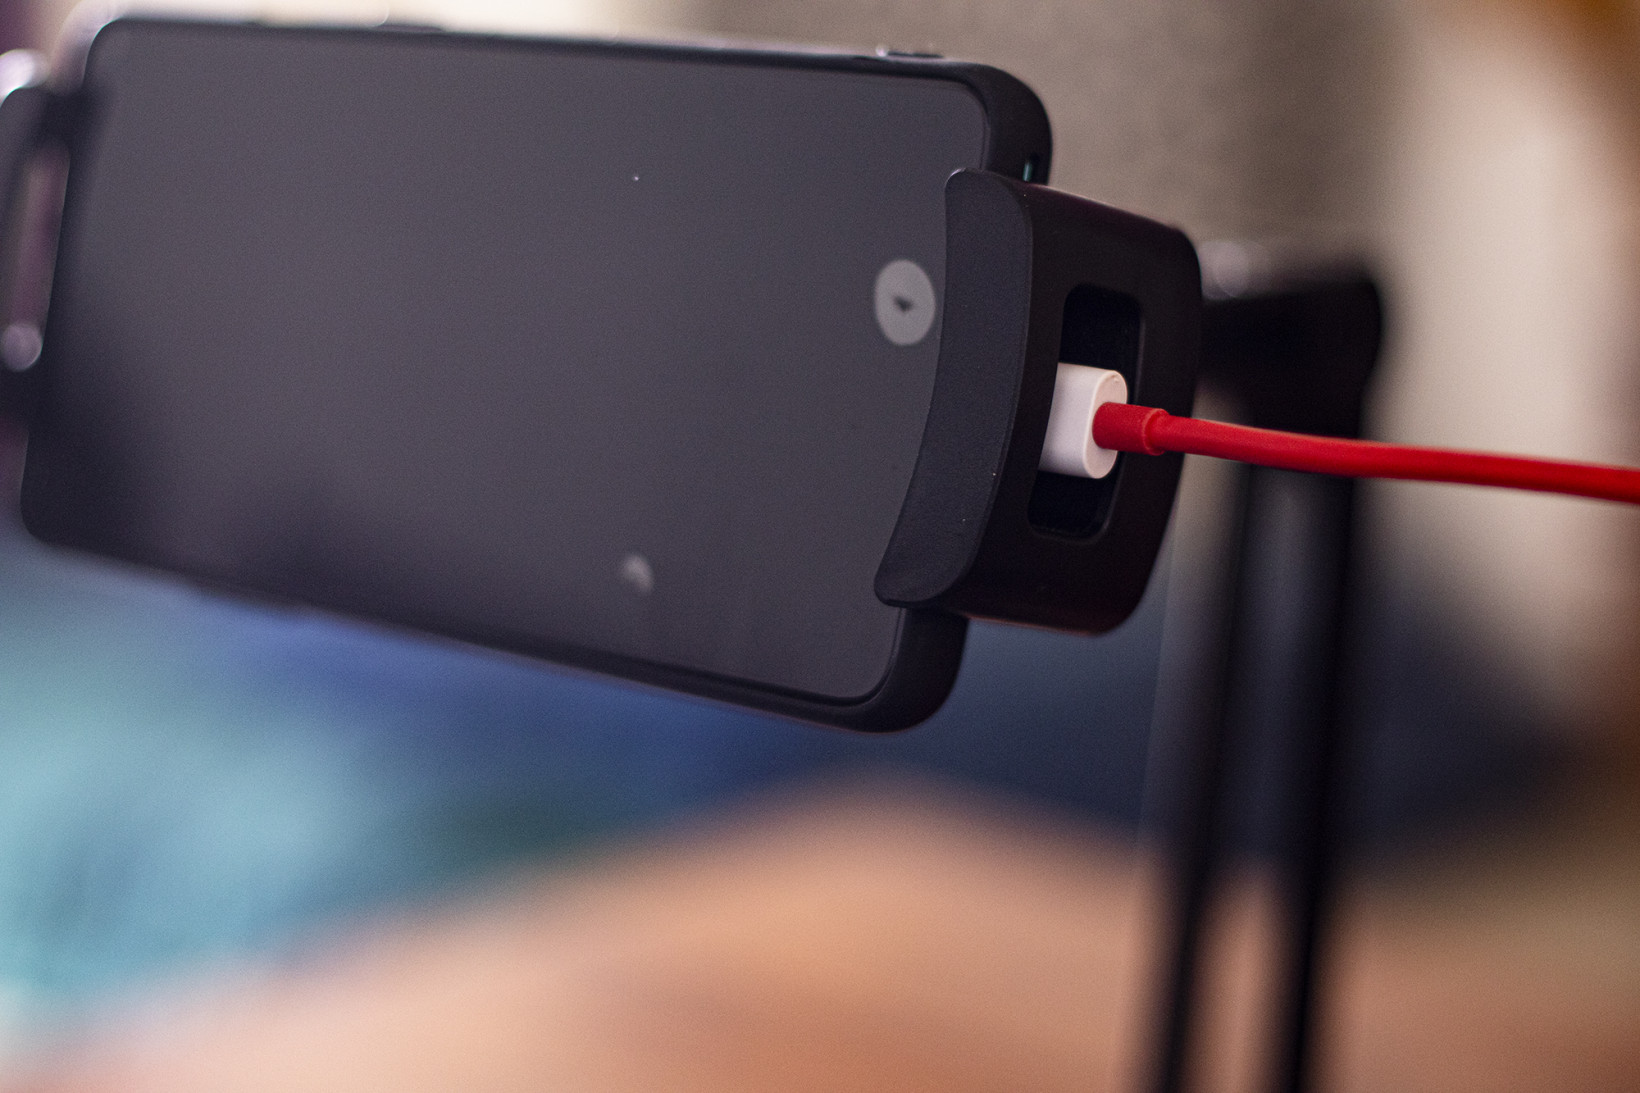 The HoverBar Duo has cutouts that let you connect a charging cable to your phone while in use